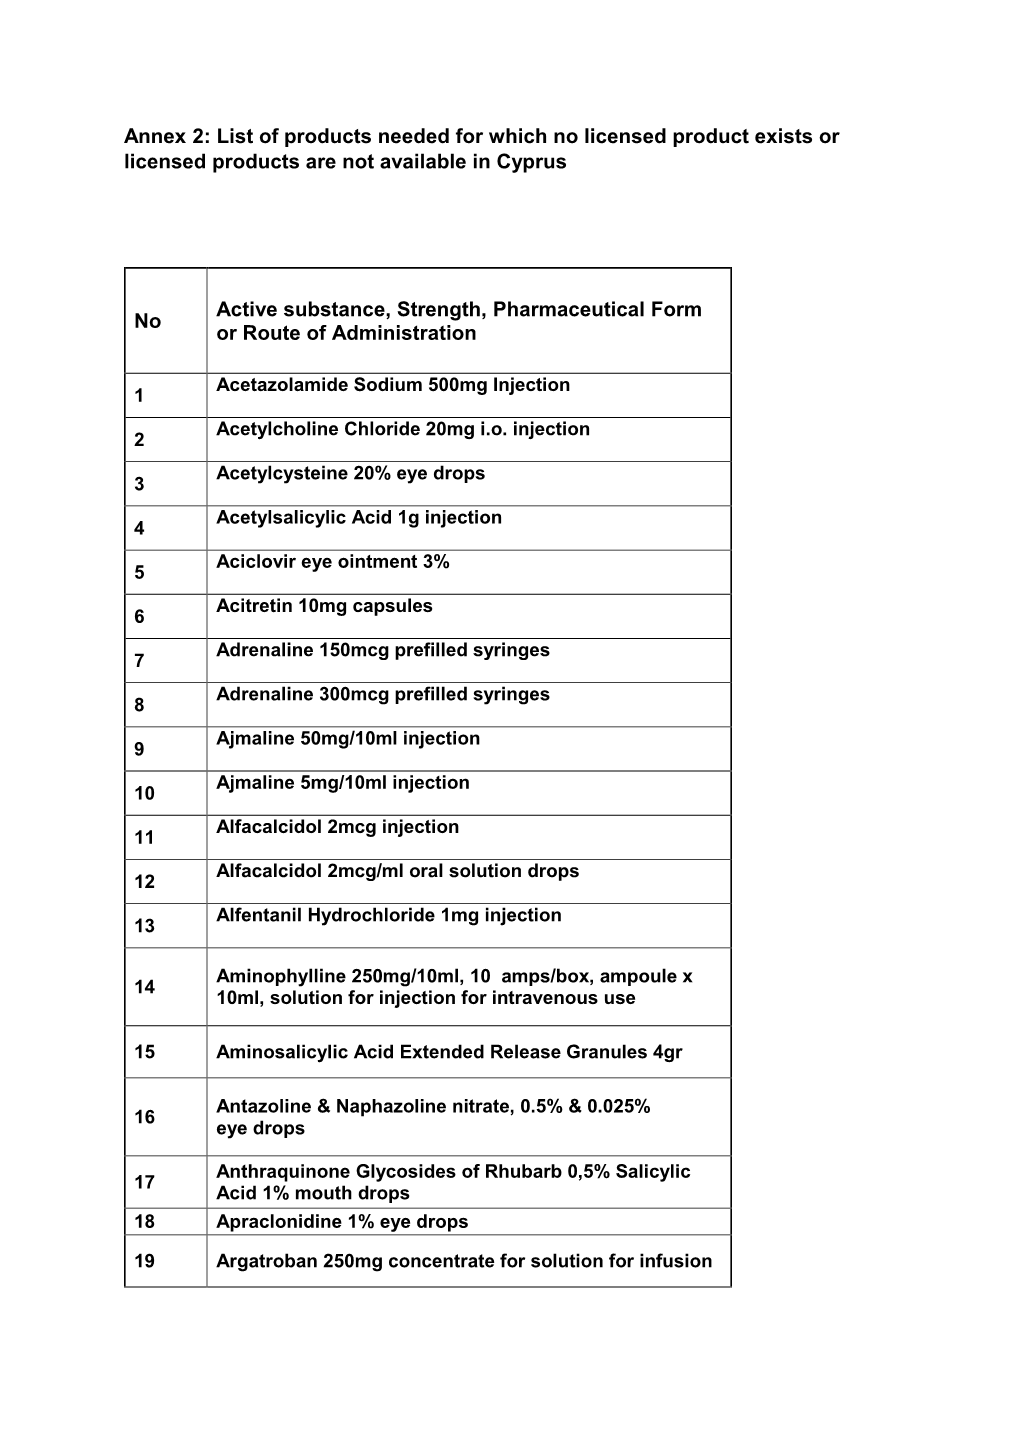 Annex 2: List of Products Needed for Which No Licensed Product Exists Or Licensed Products Are Not Available in Cyprus